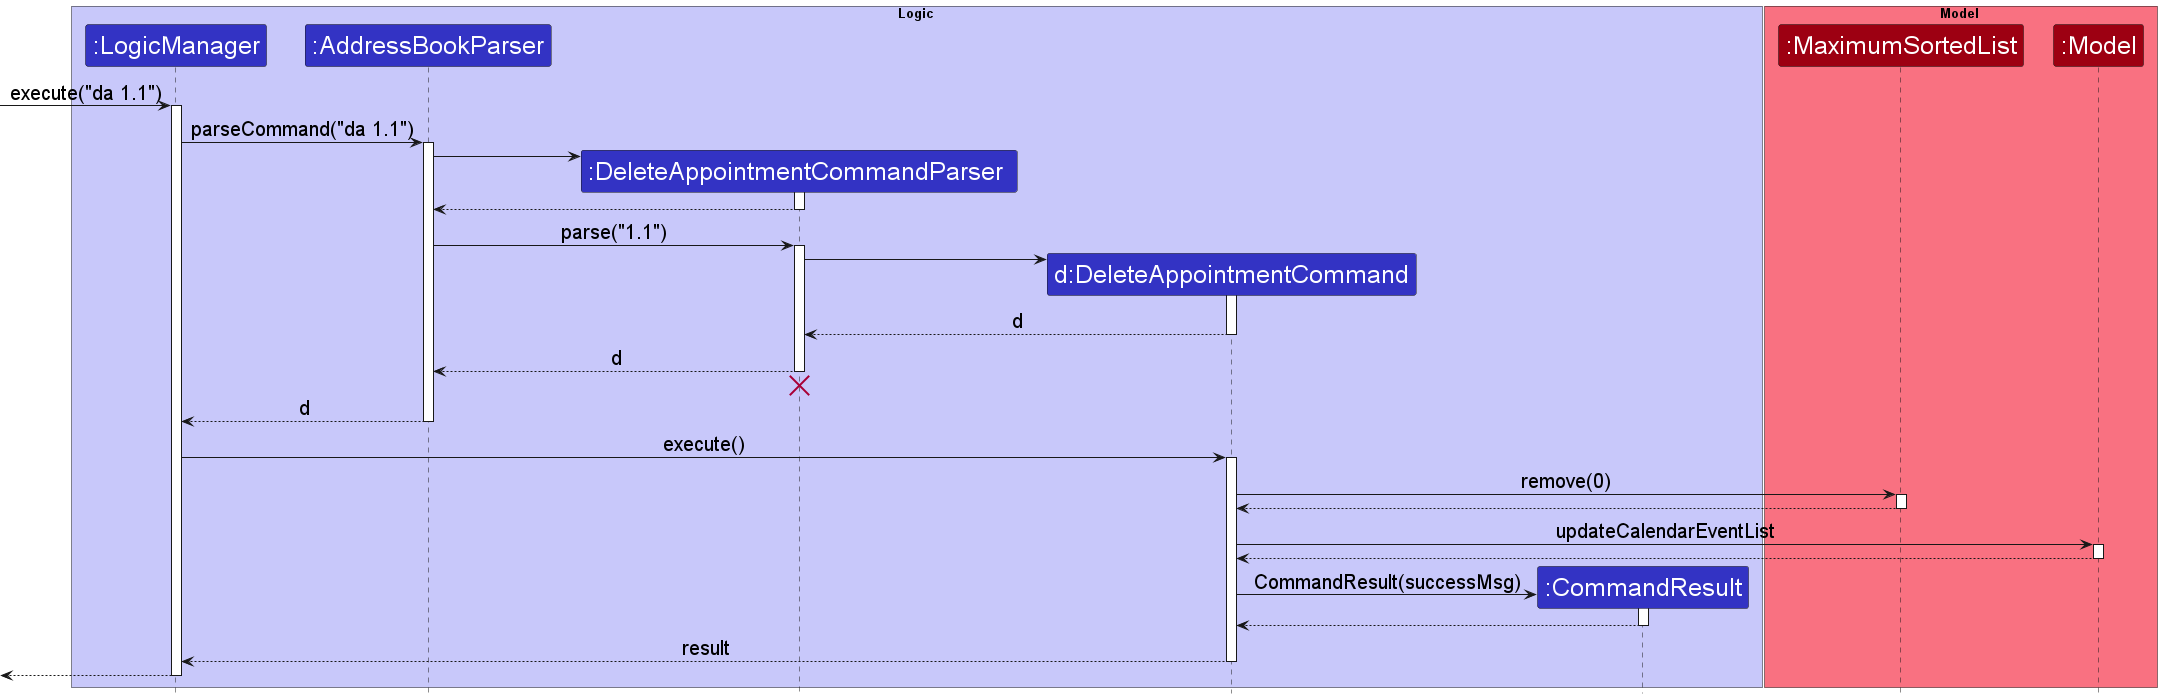 Delete Appointment Sequence Diagram